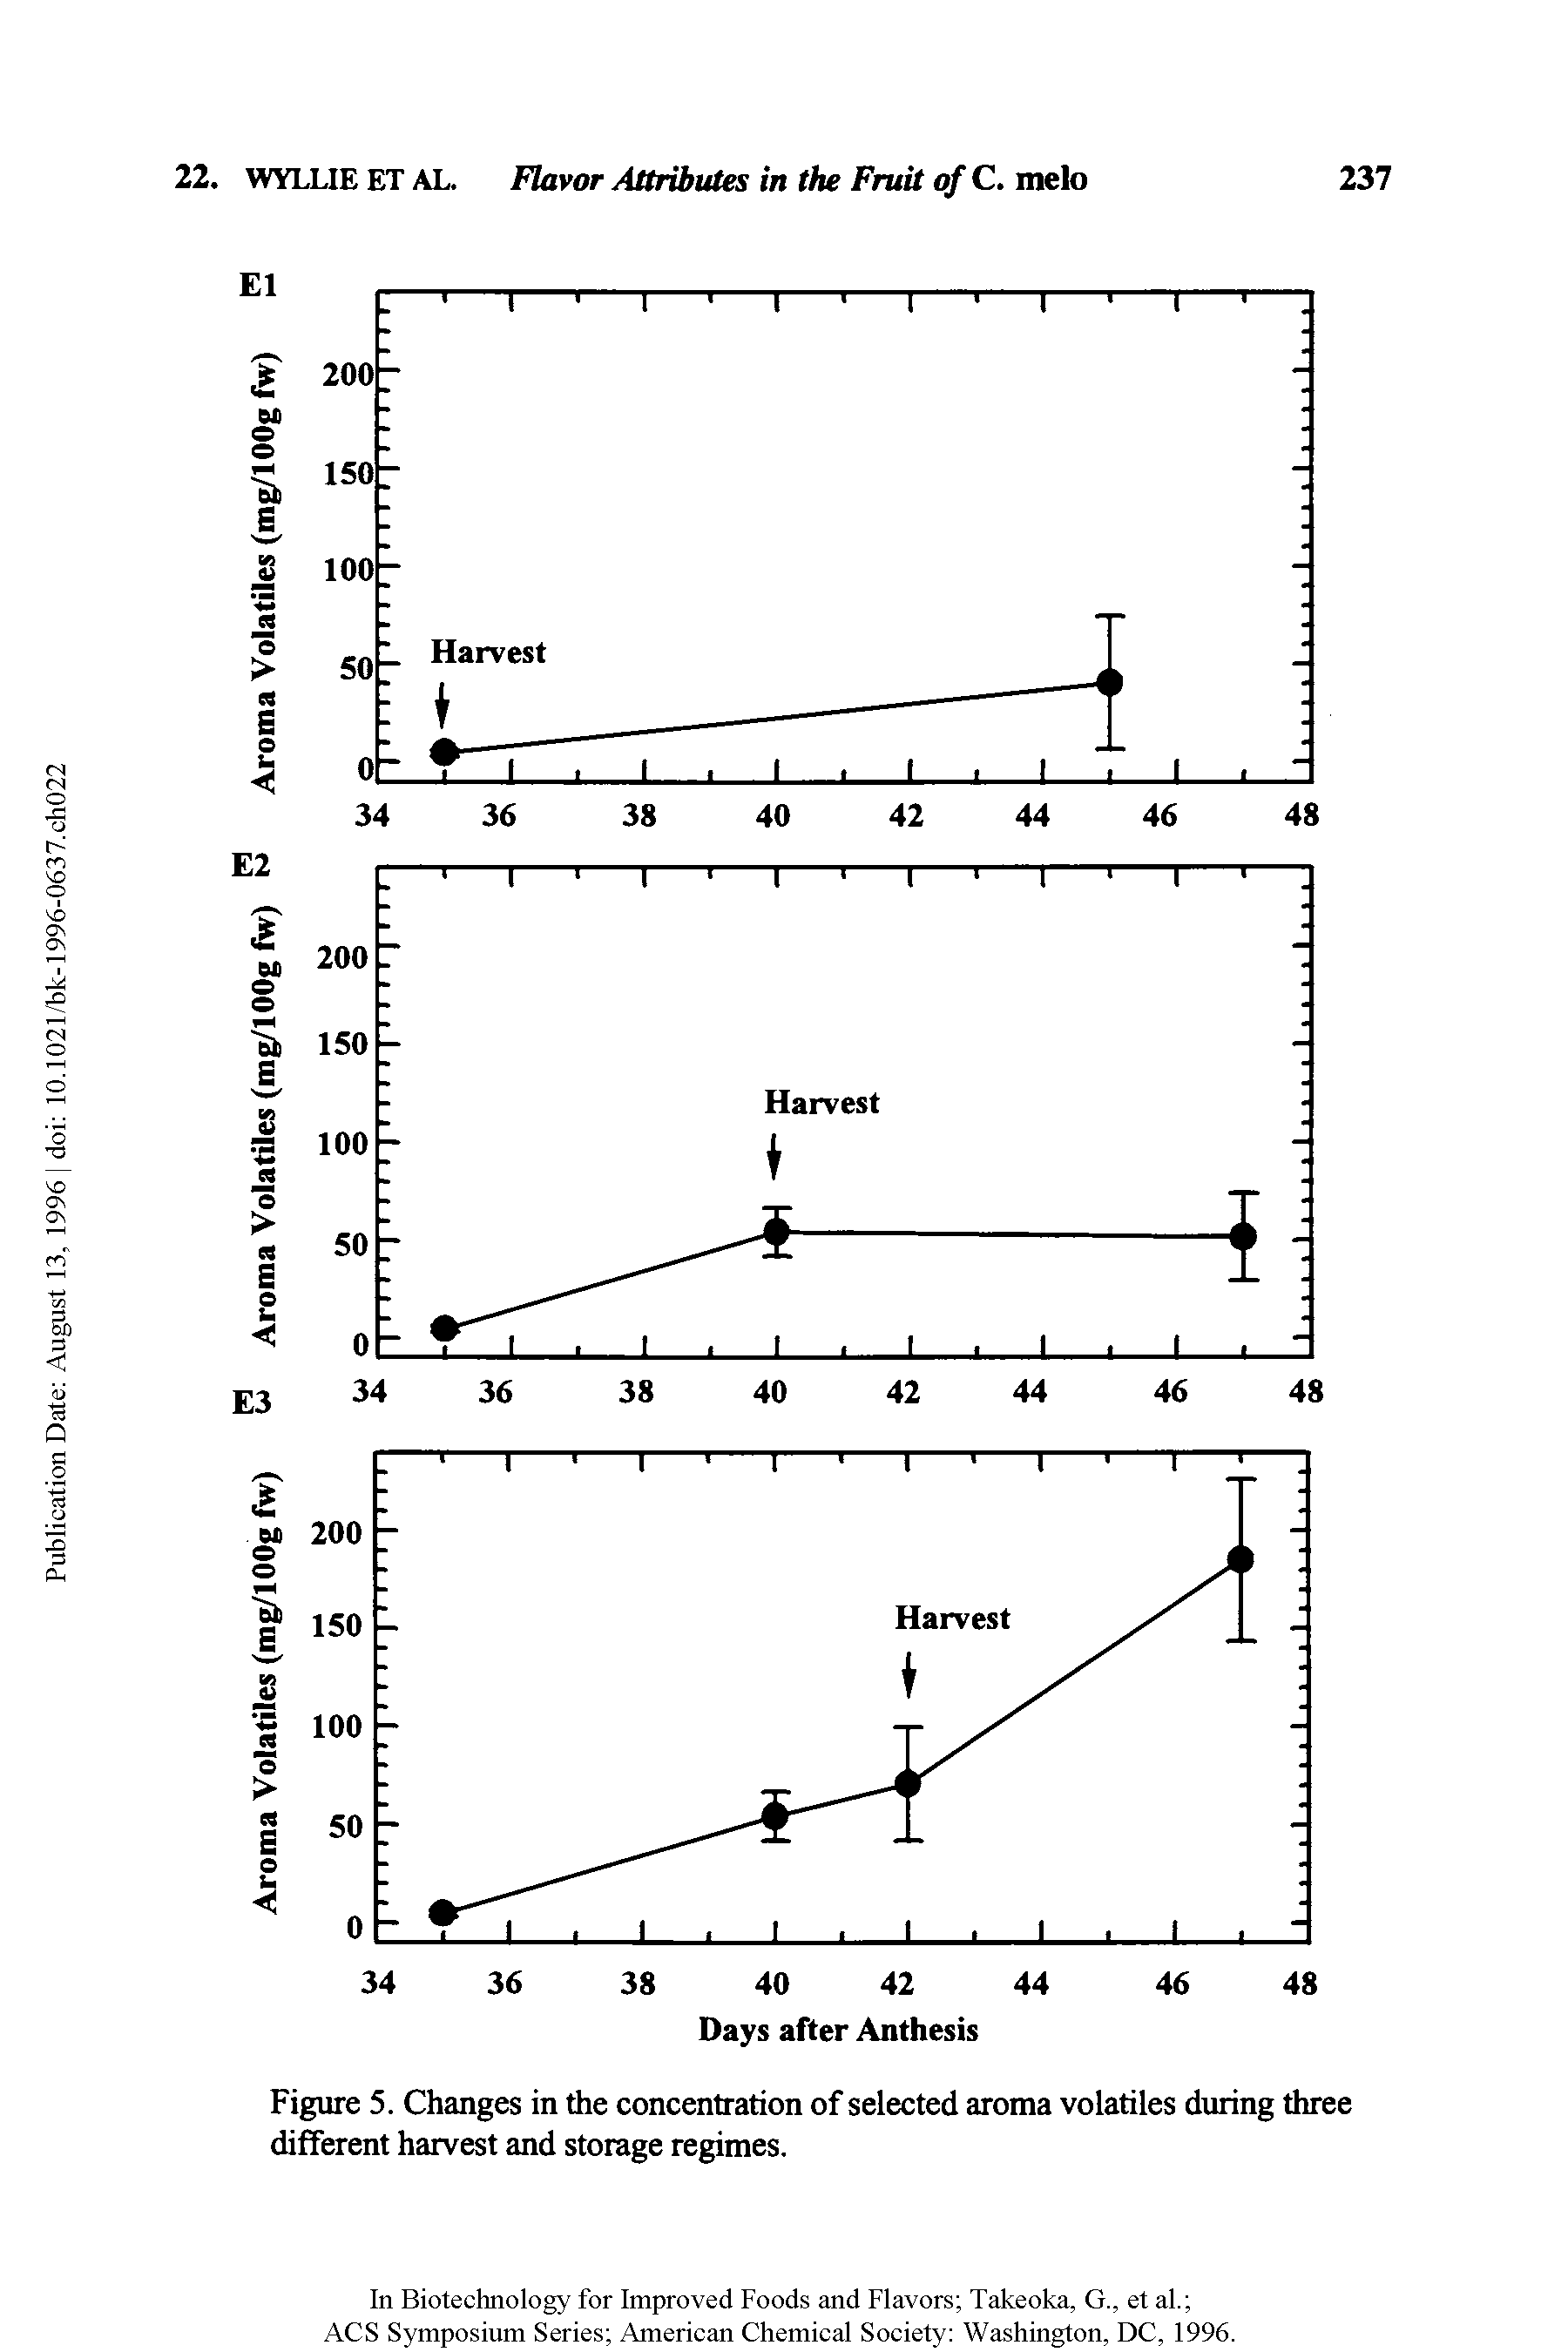 Figure 5. Changes in the concentration of selected aroma volatiles during three different harvest and storage regimes.